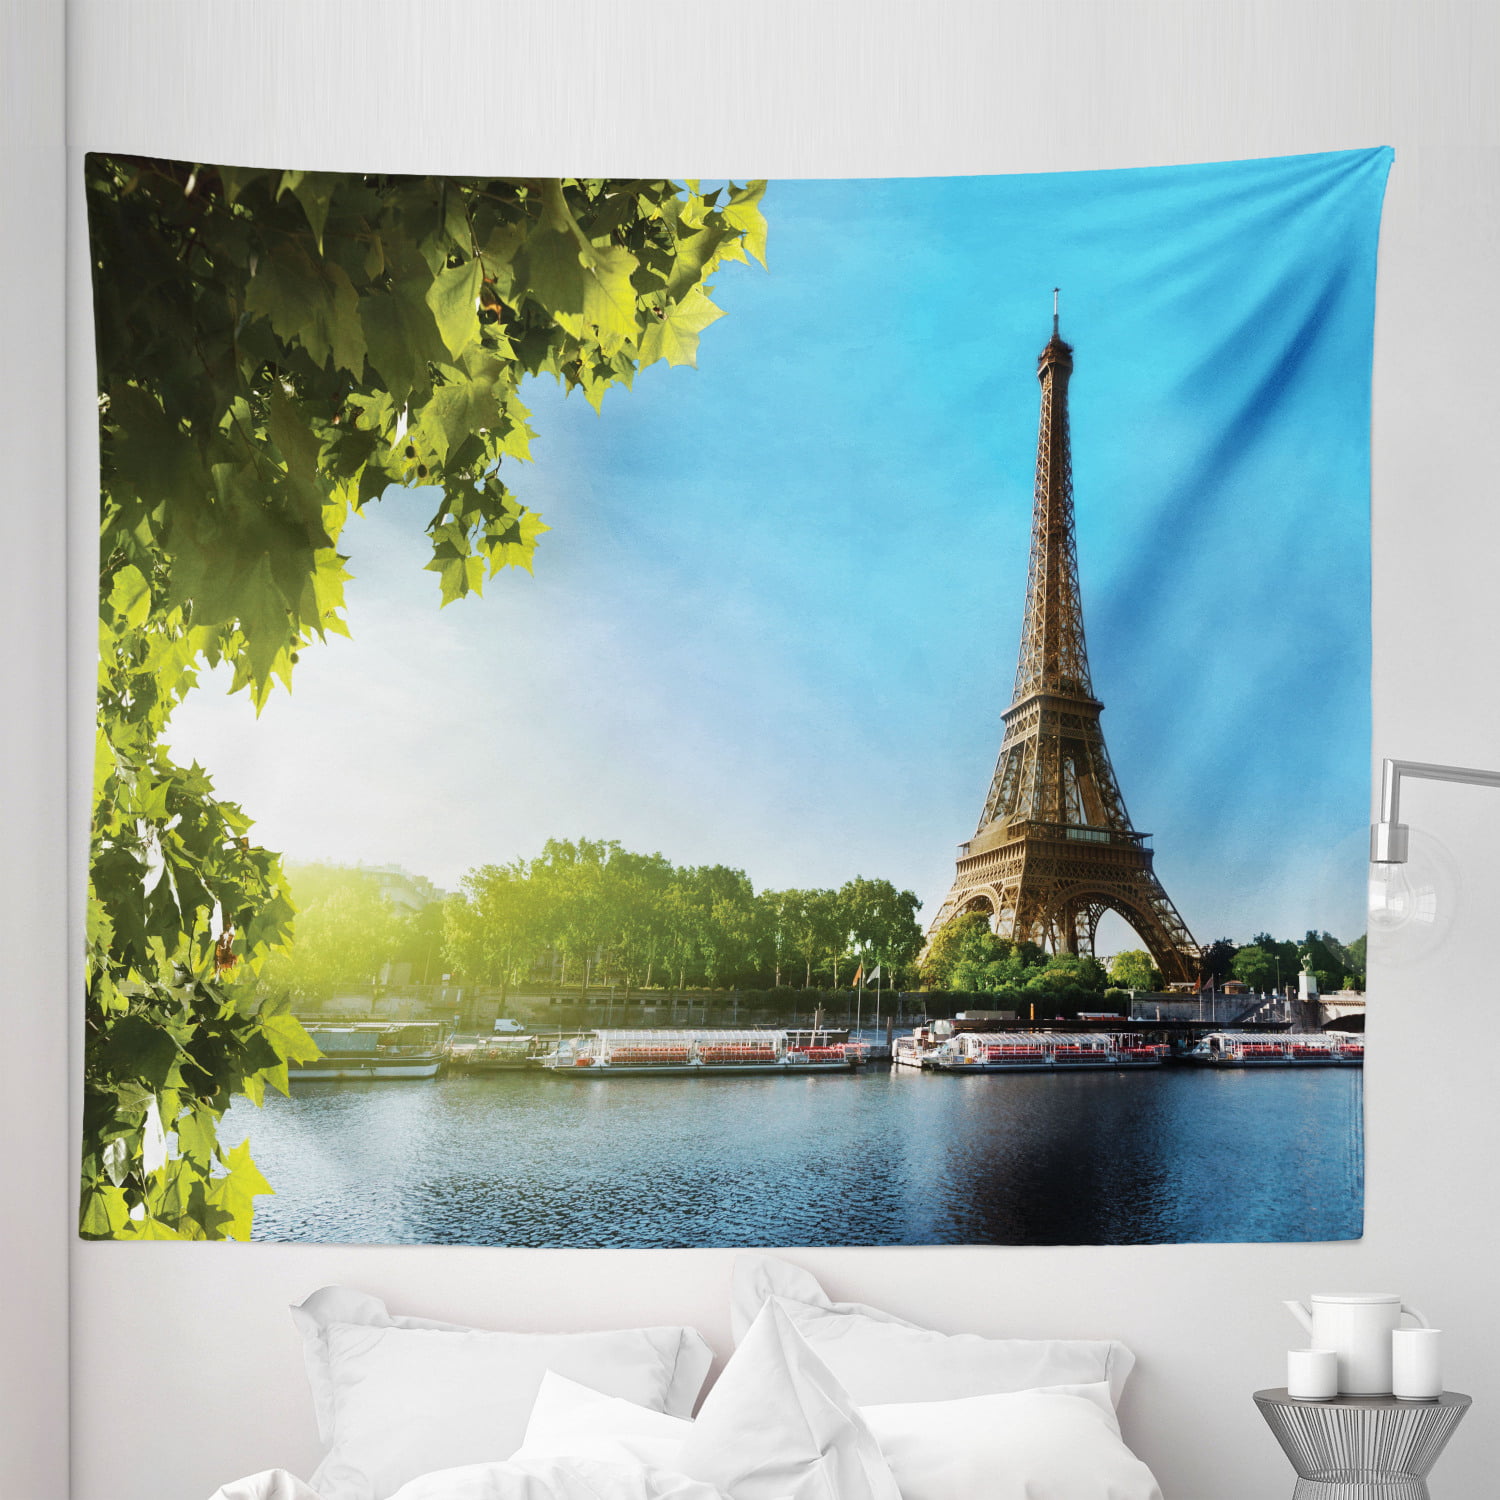 Tapestry Wall Hanging Blanket Polyester Dorm Decor Eiffel Tower Paris LOVE Roses 